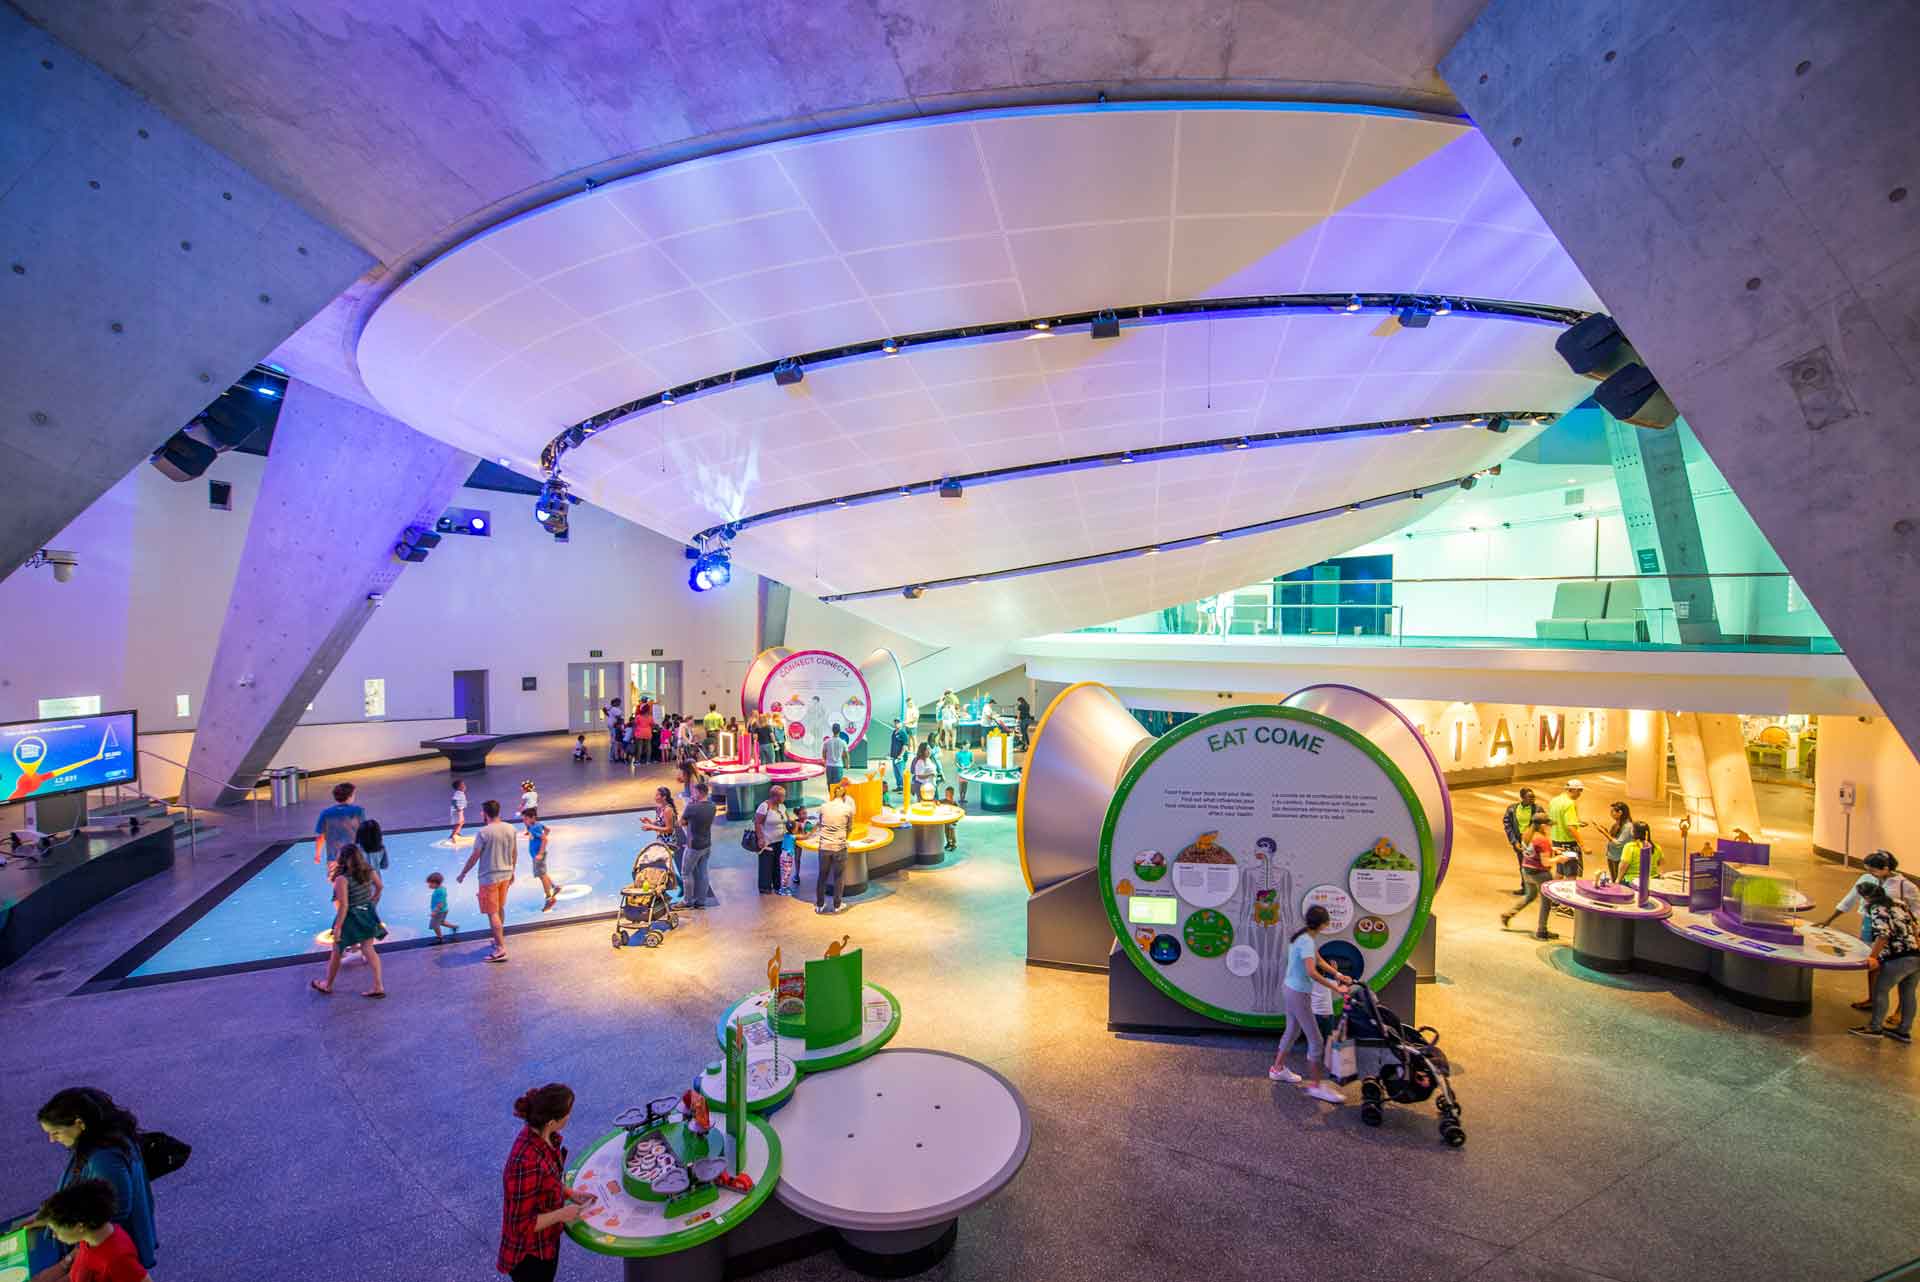 A modern building interior features a curved, white ceiling extending over an interactive exhibition space where visitors engage with circular green and white educational displays about nutrition.